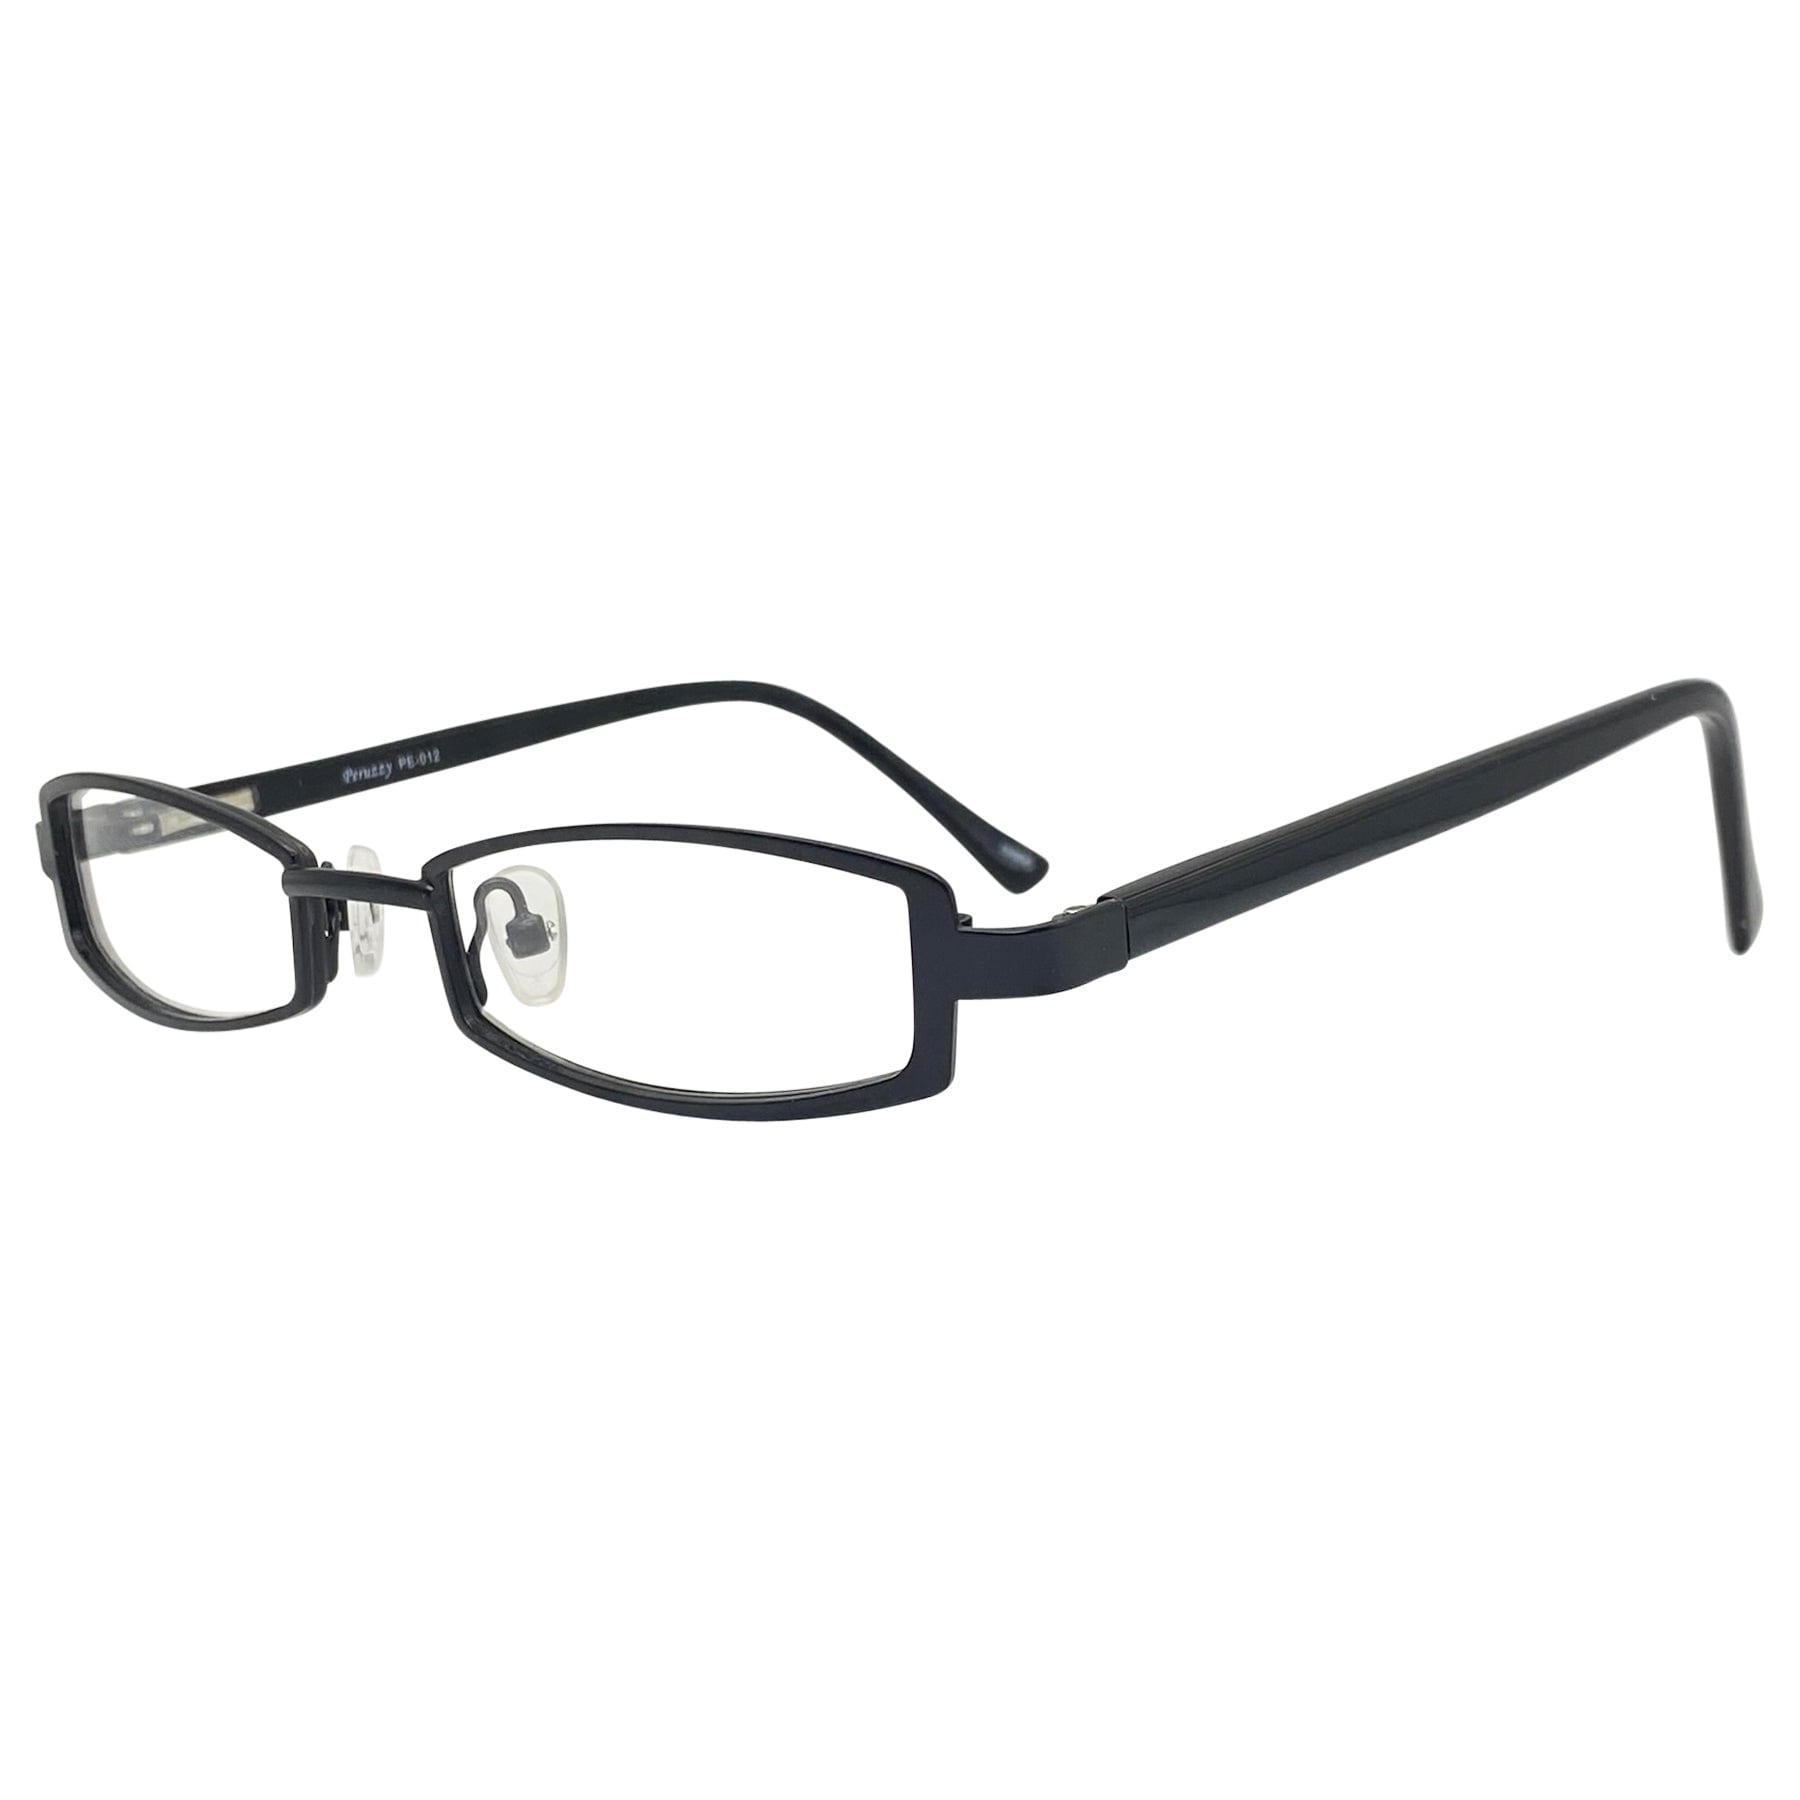 90s retro rectangular style frame with a matte black metal finish